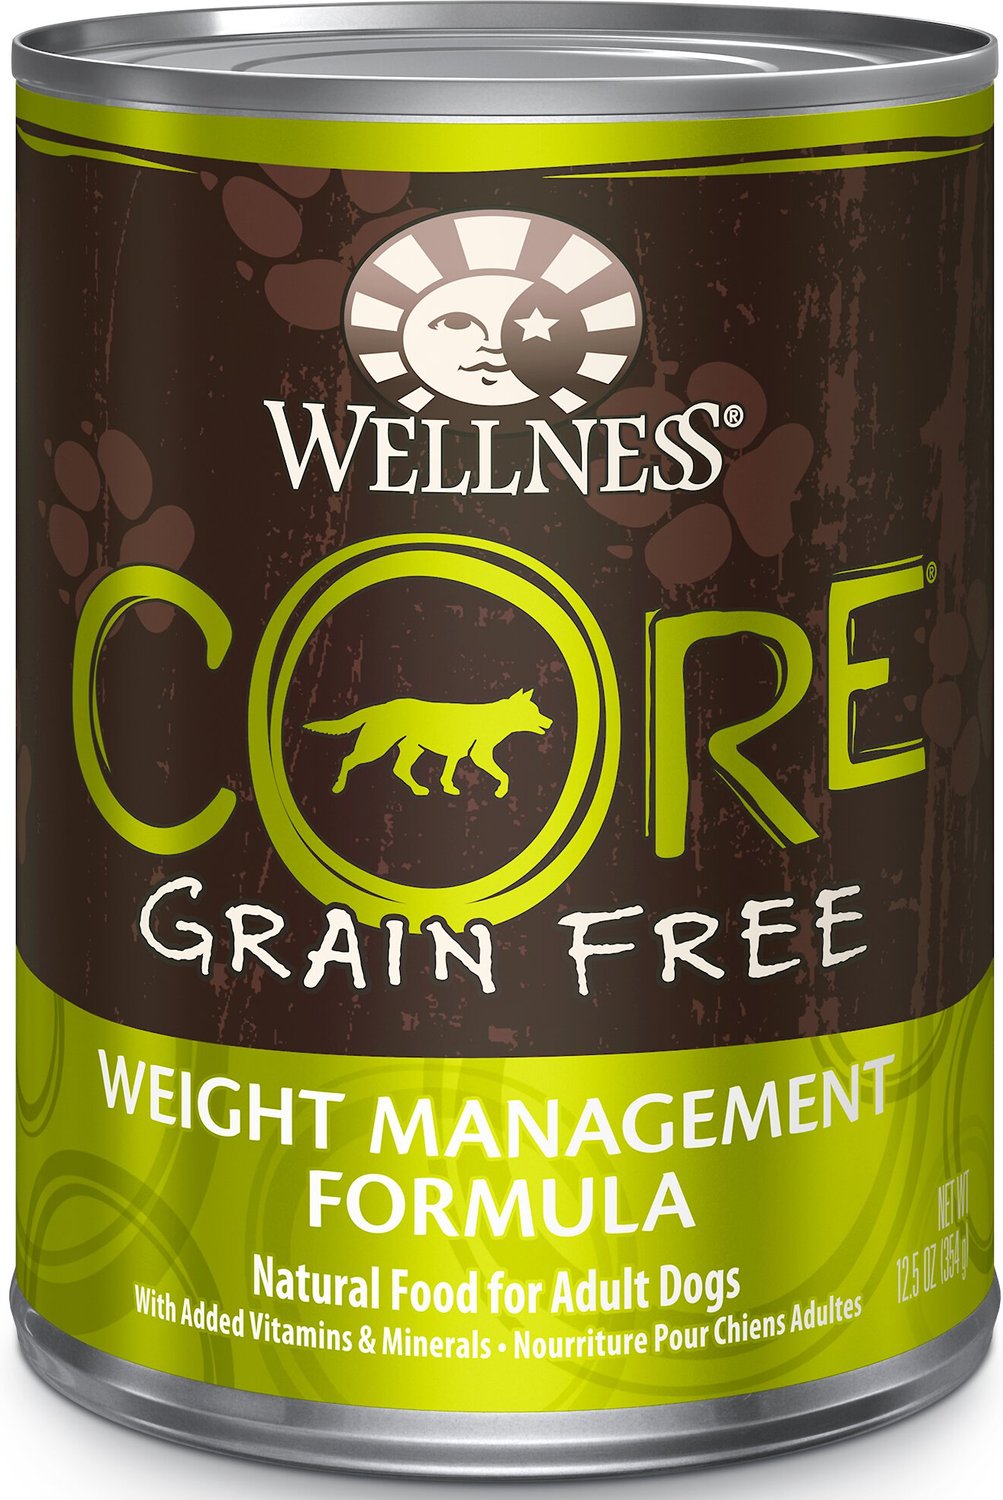 Wellness CORE Grain-Free Weight Management Formula Canned Dog Food